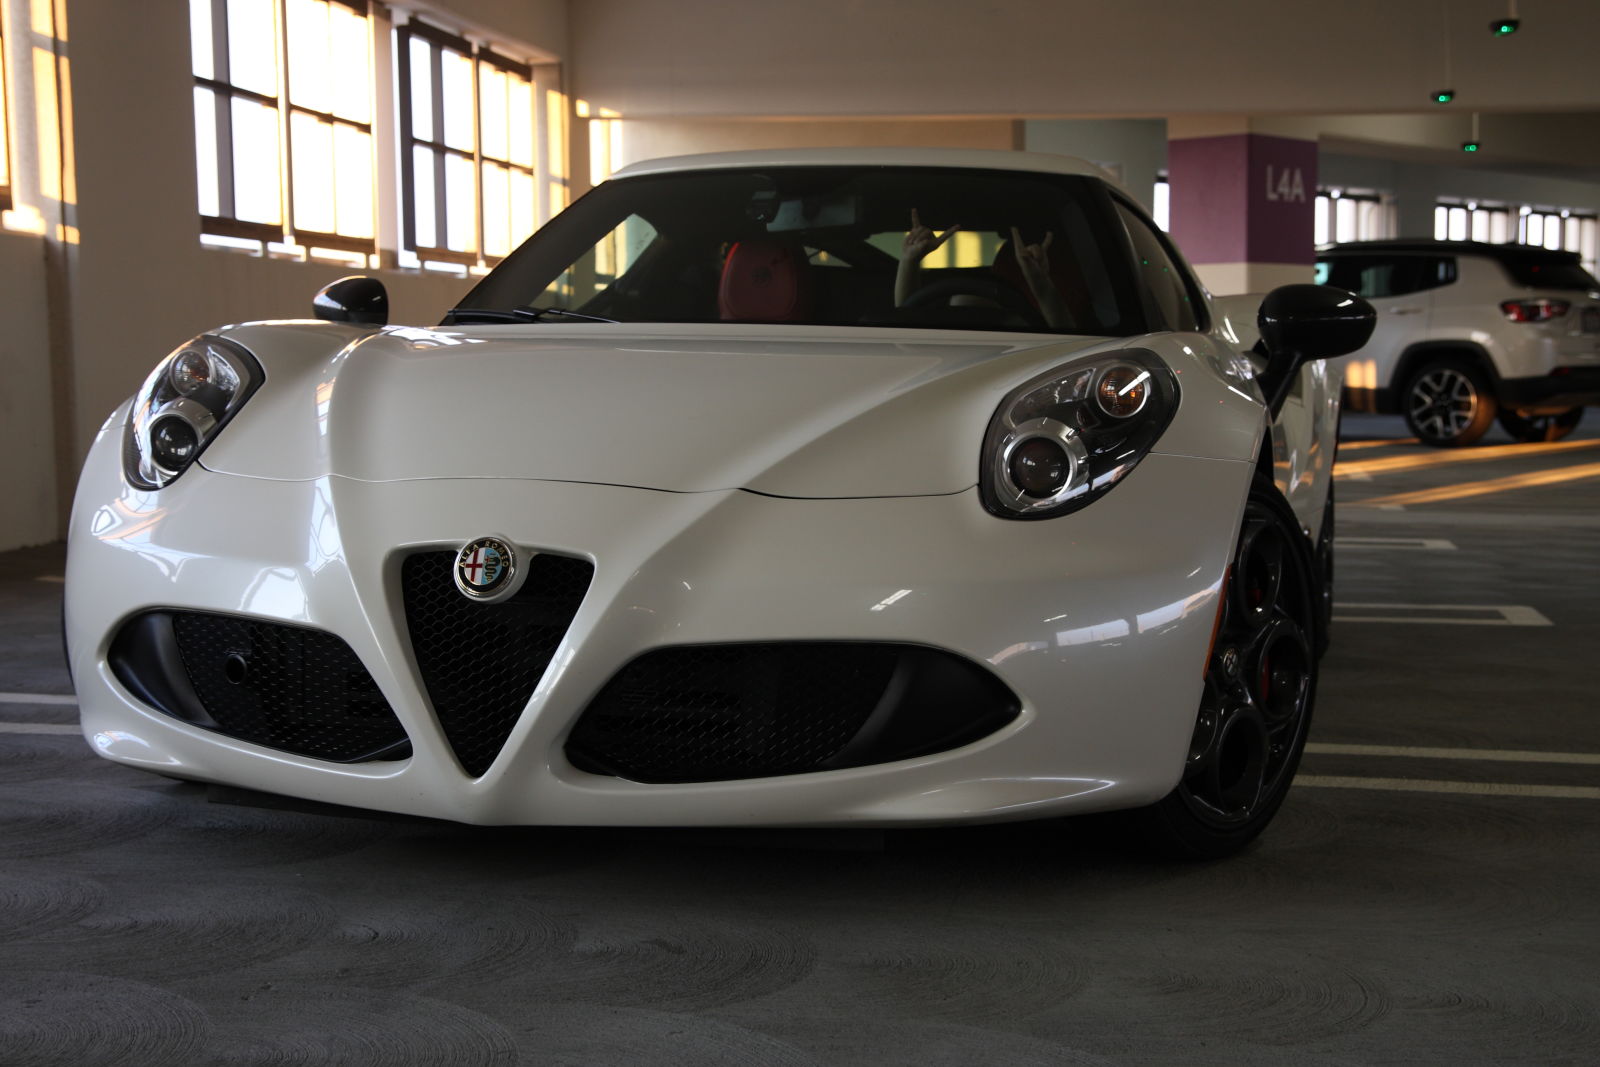 Illustration for article titled Oppo Review: Alfa Romeo 4C First Driving Impressions